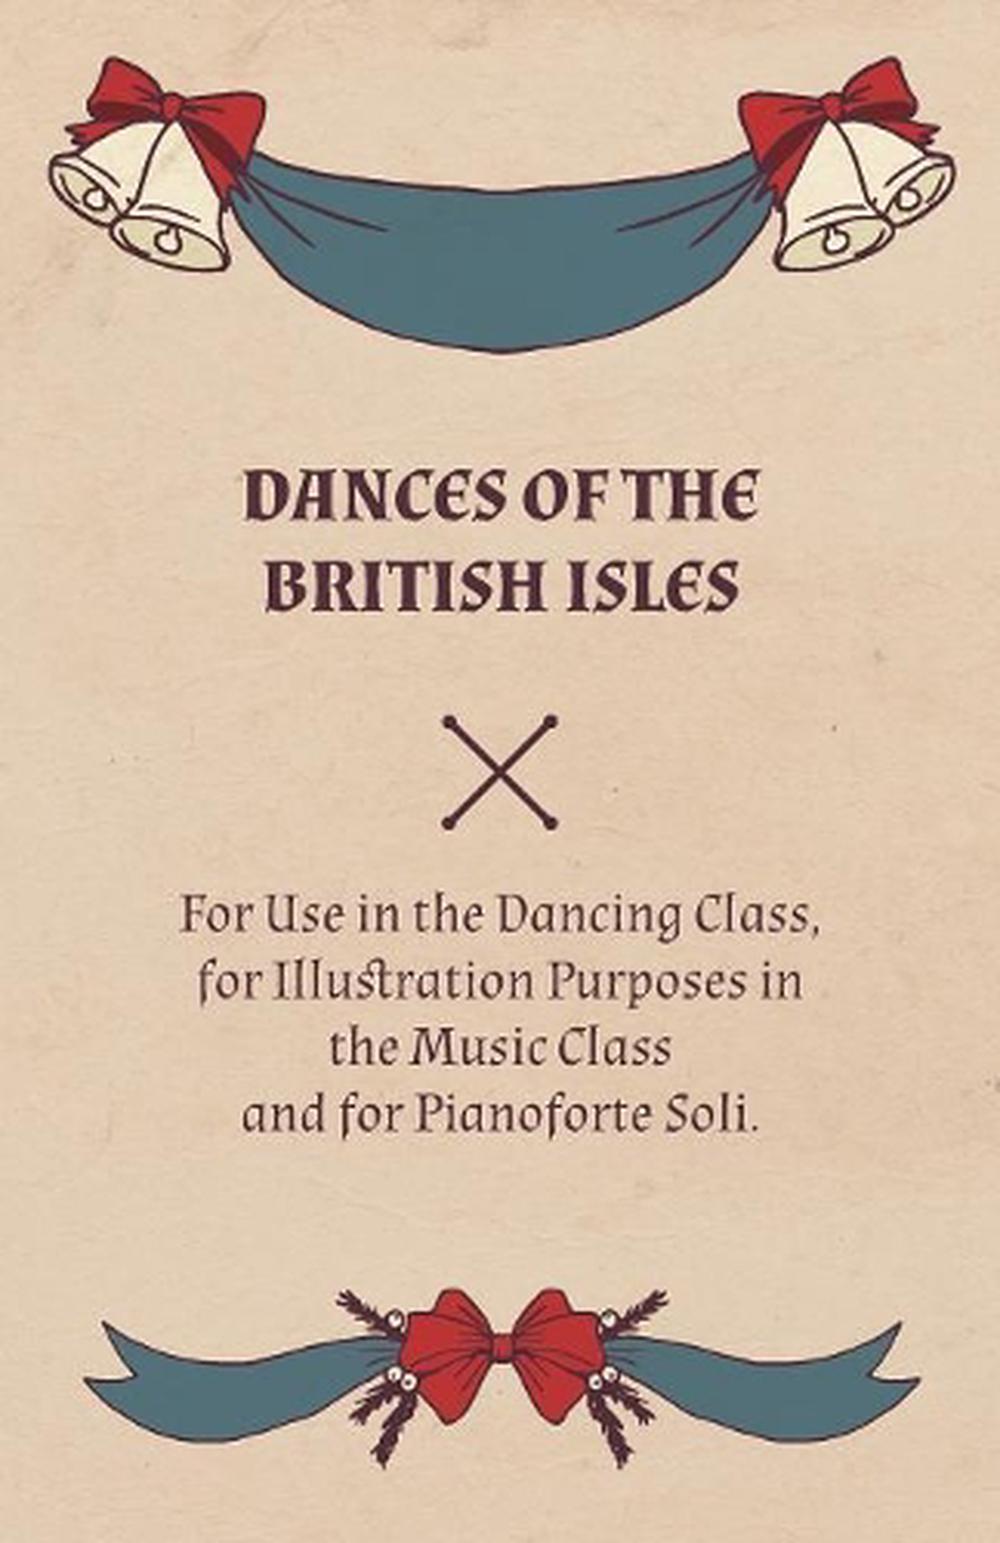 Dances of the British Isles - For Use in the Dancing Class, for Illustration Pur